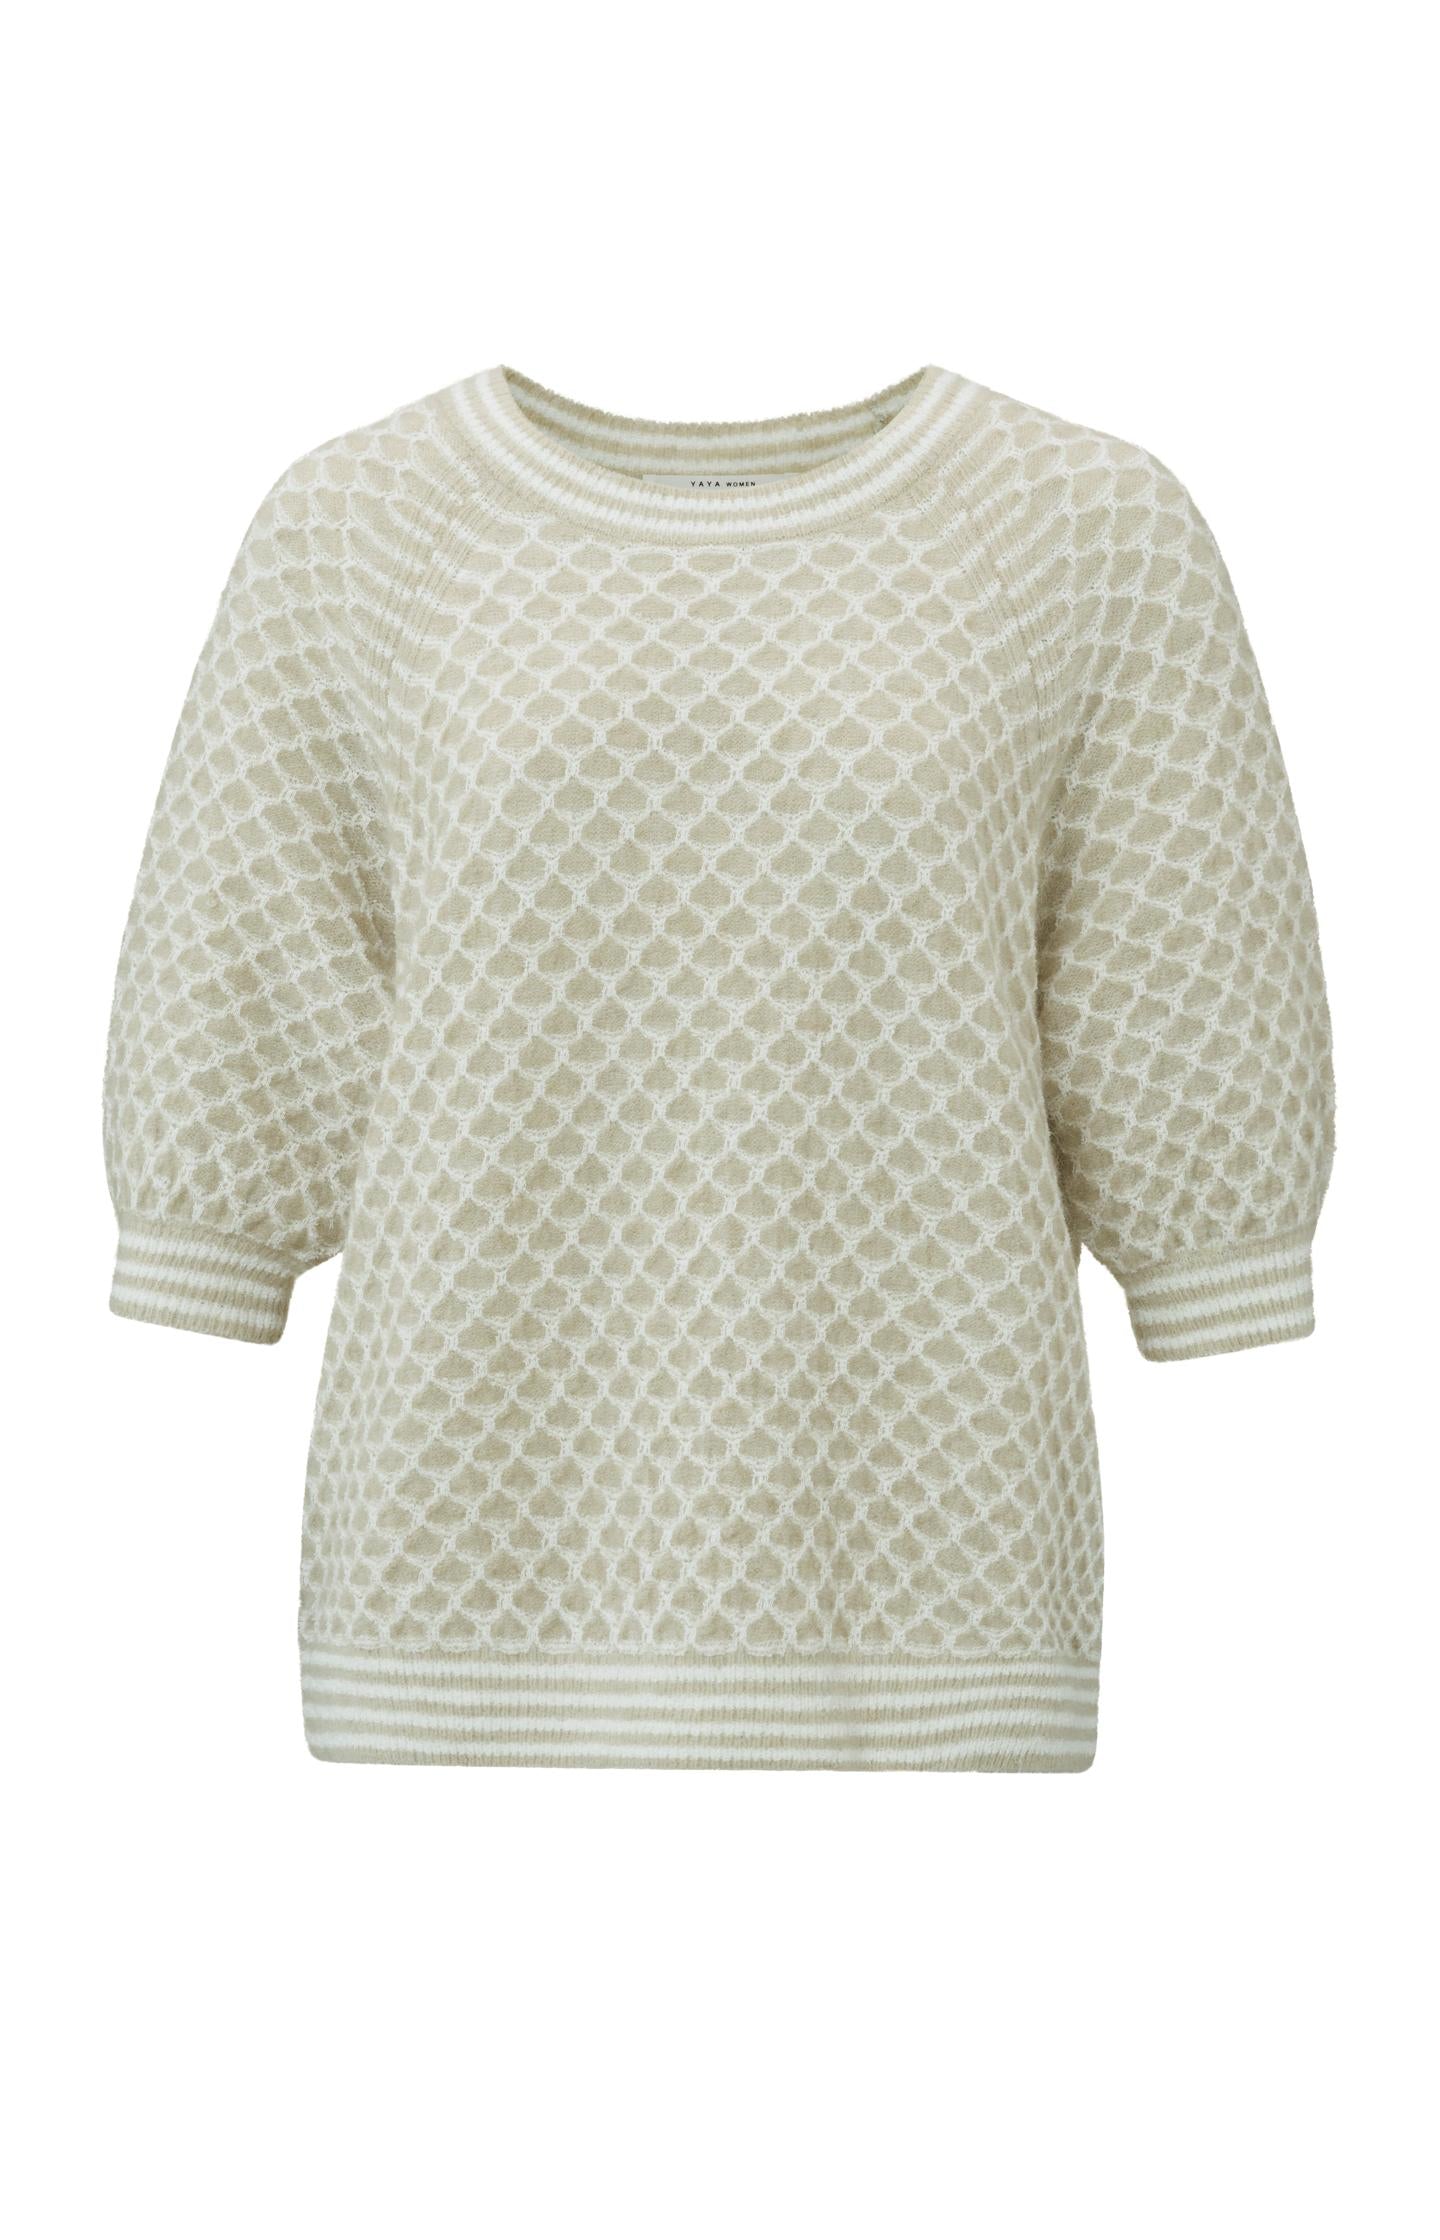 Textured sweater with round neck and short puffed sleeves - Type: product